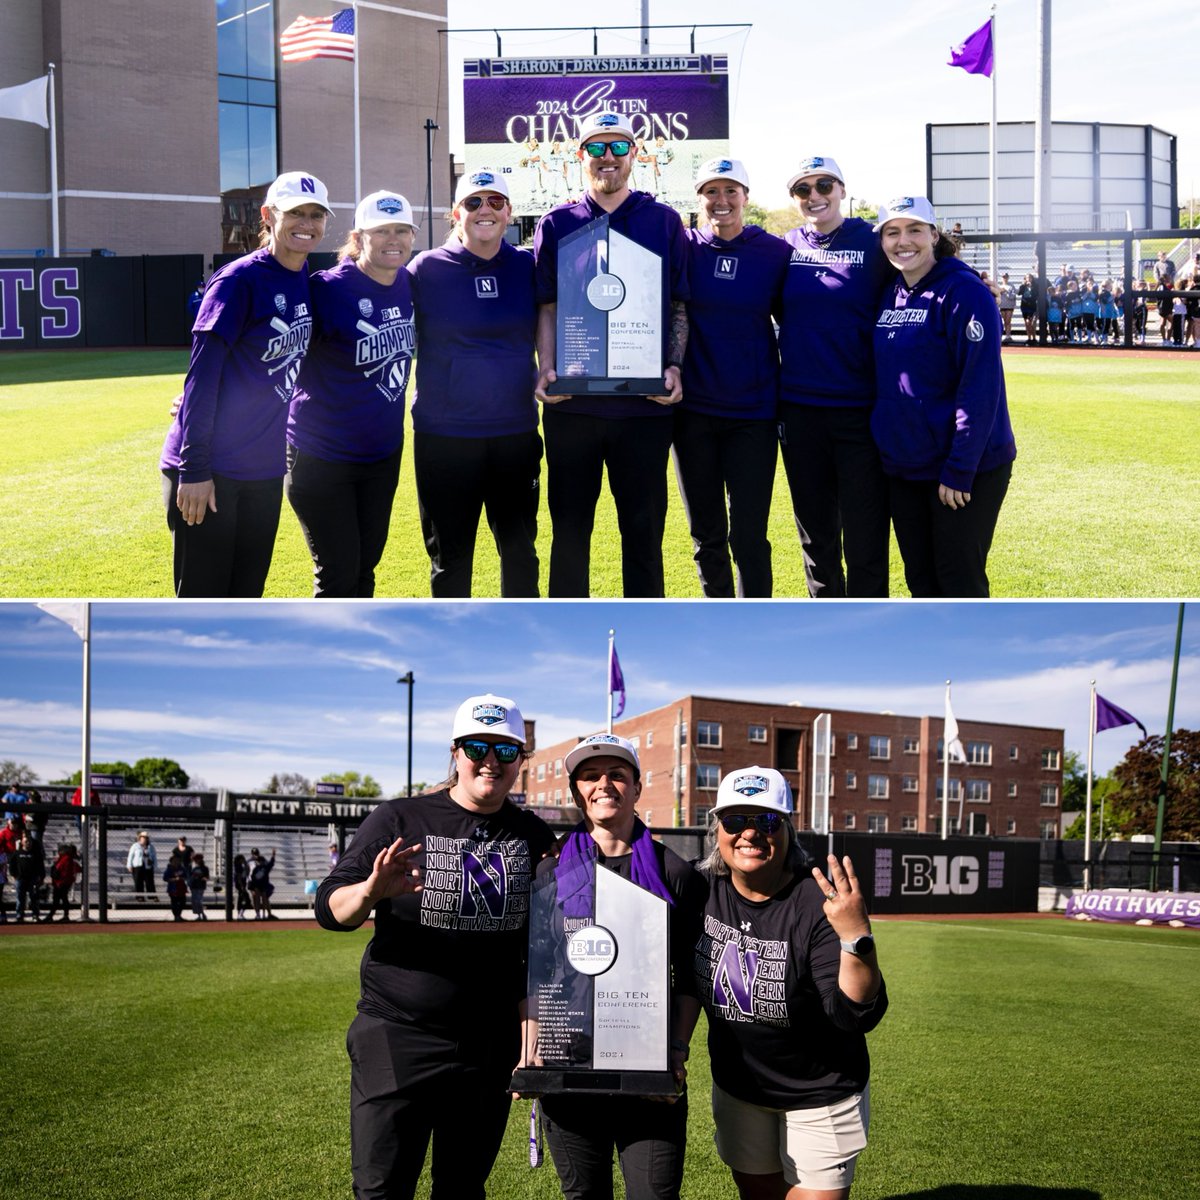 **Coaching Staff of the Year The hard work, creativity and LOVE this group is pouring into OUR program is REMARKABLE 💜🐄